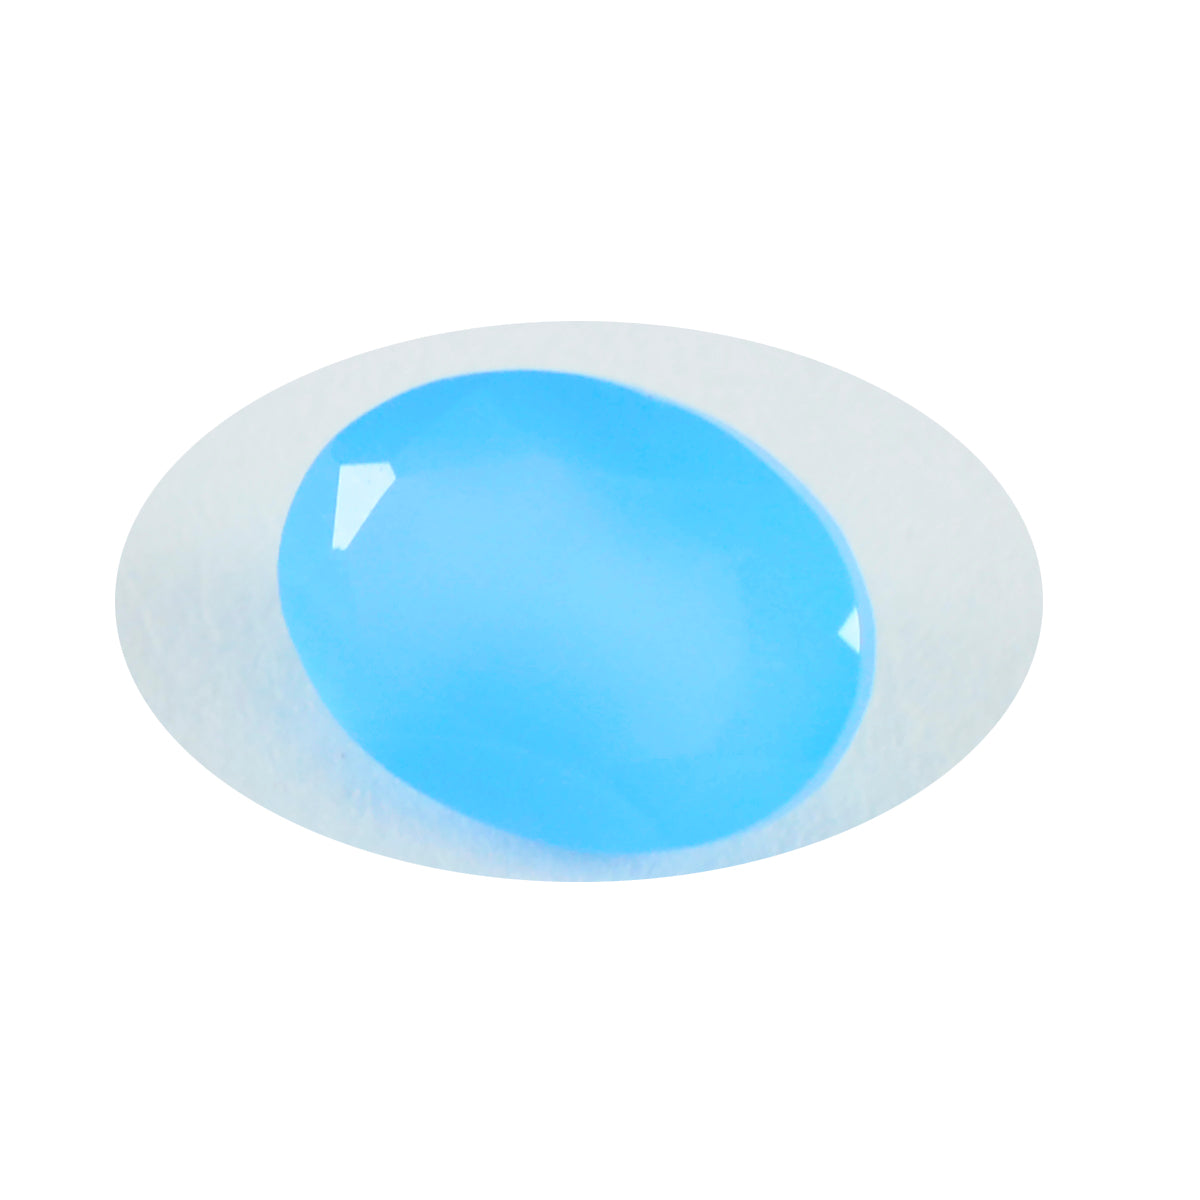 Riyogems 1PC Real Blue Chalcedony Faceted 9x11 mm Oval Shape excellent Quality Gems